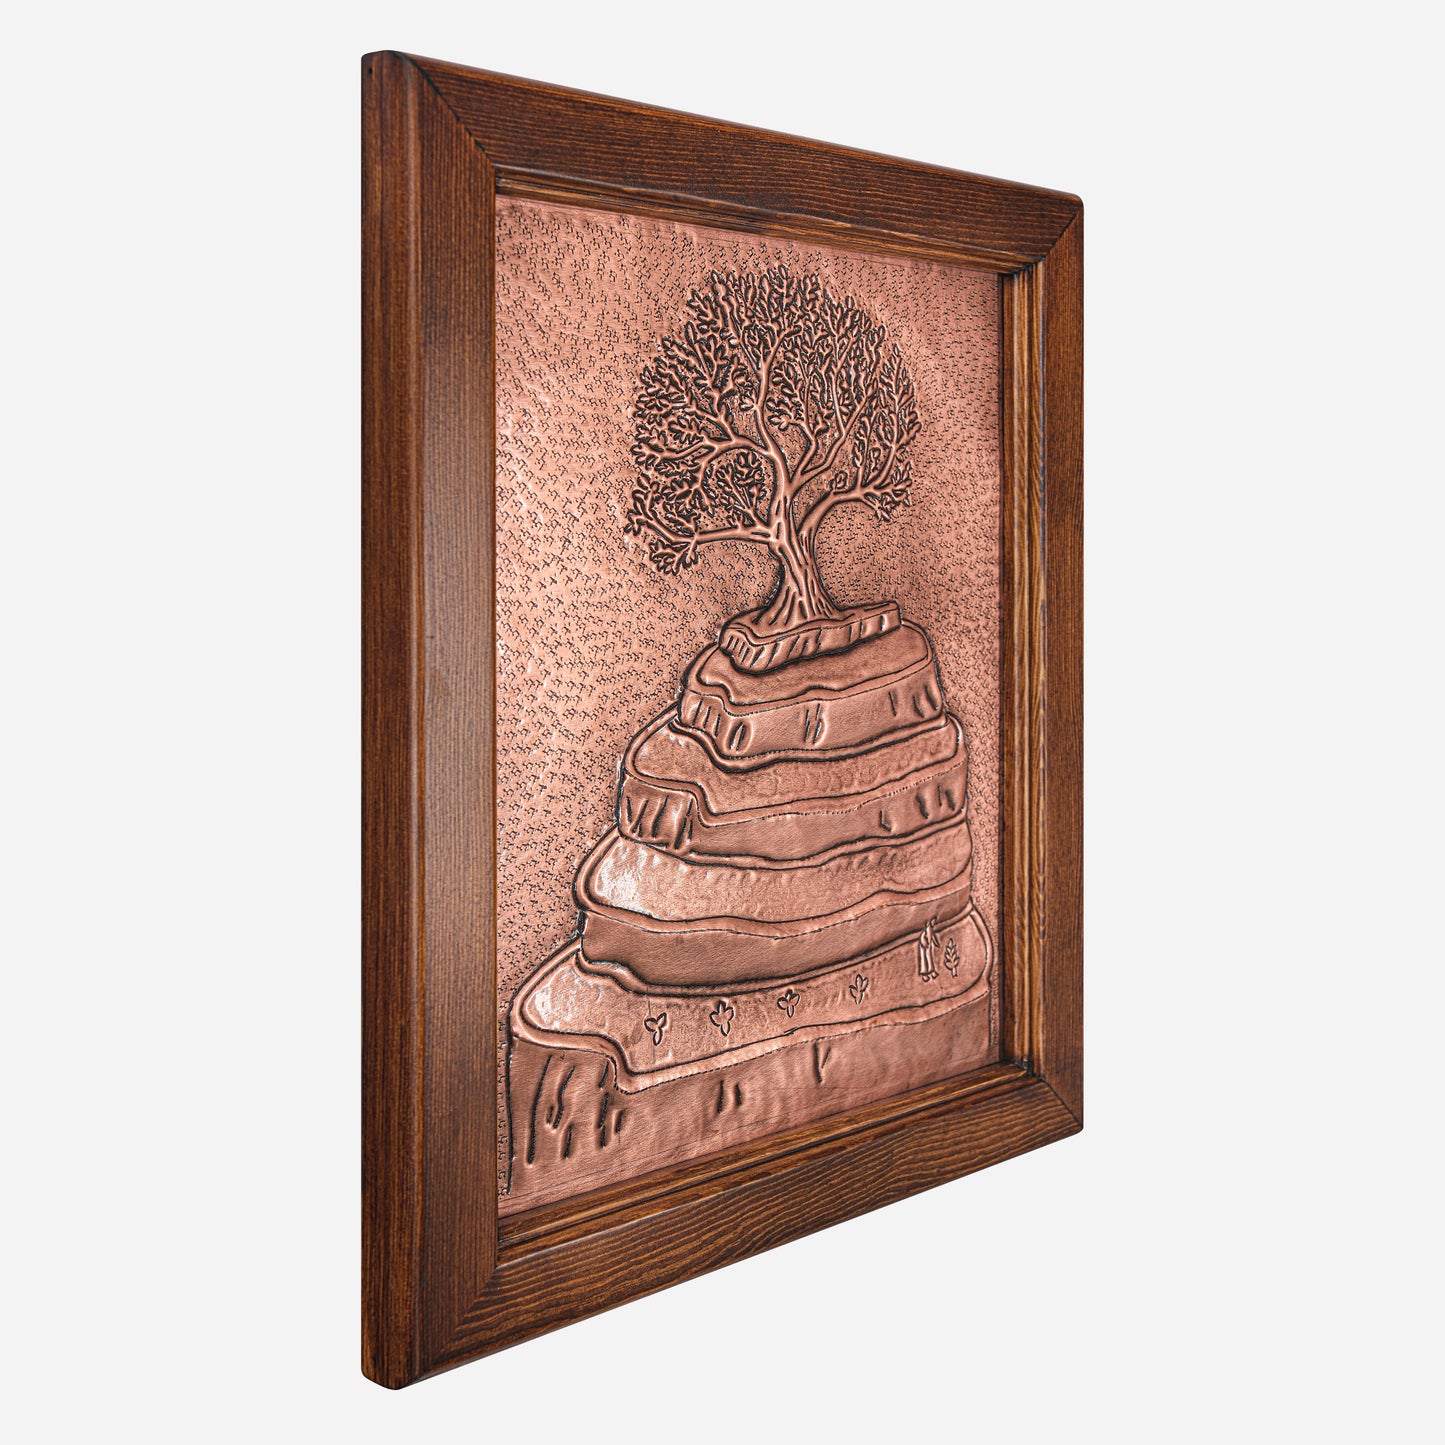 Framed Copper Artwork (Parable of the Mustard Seed)